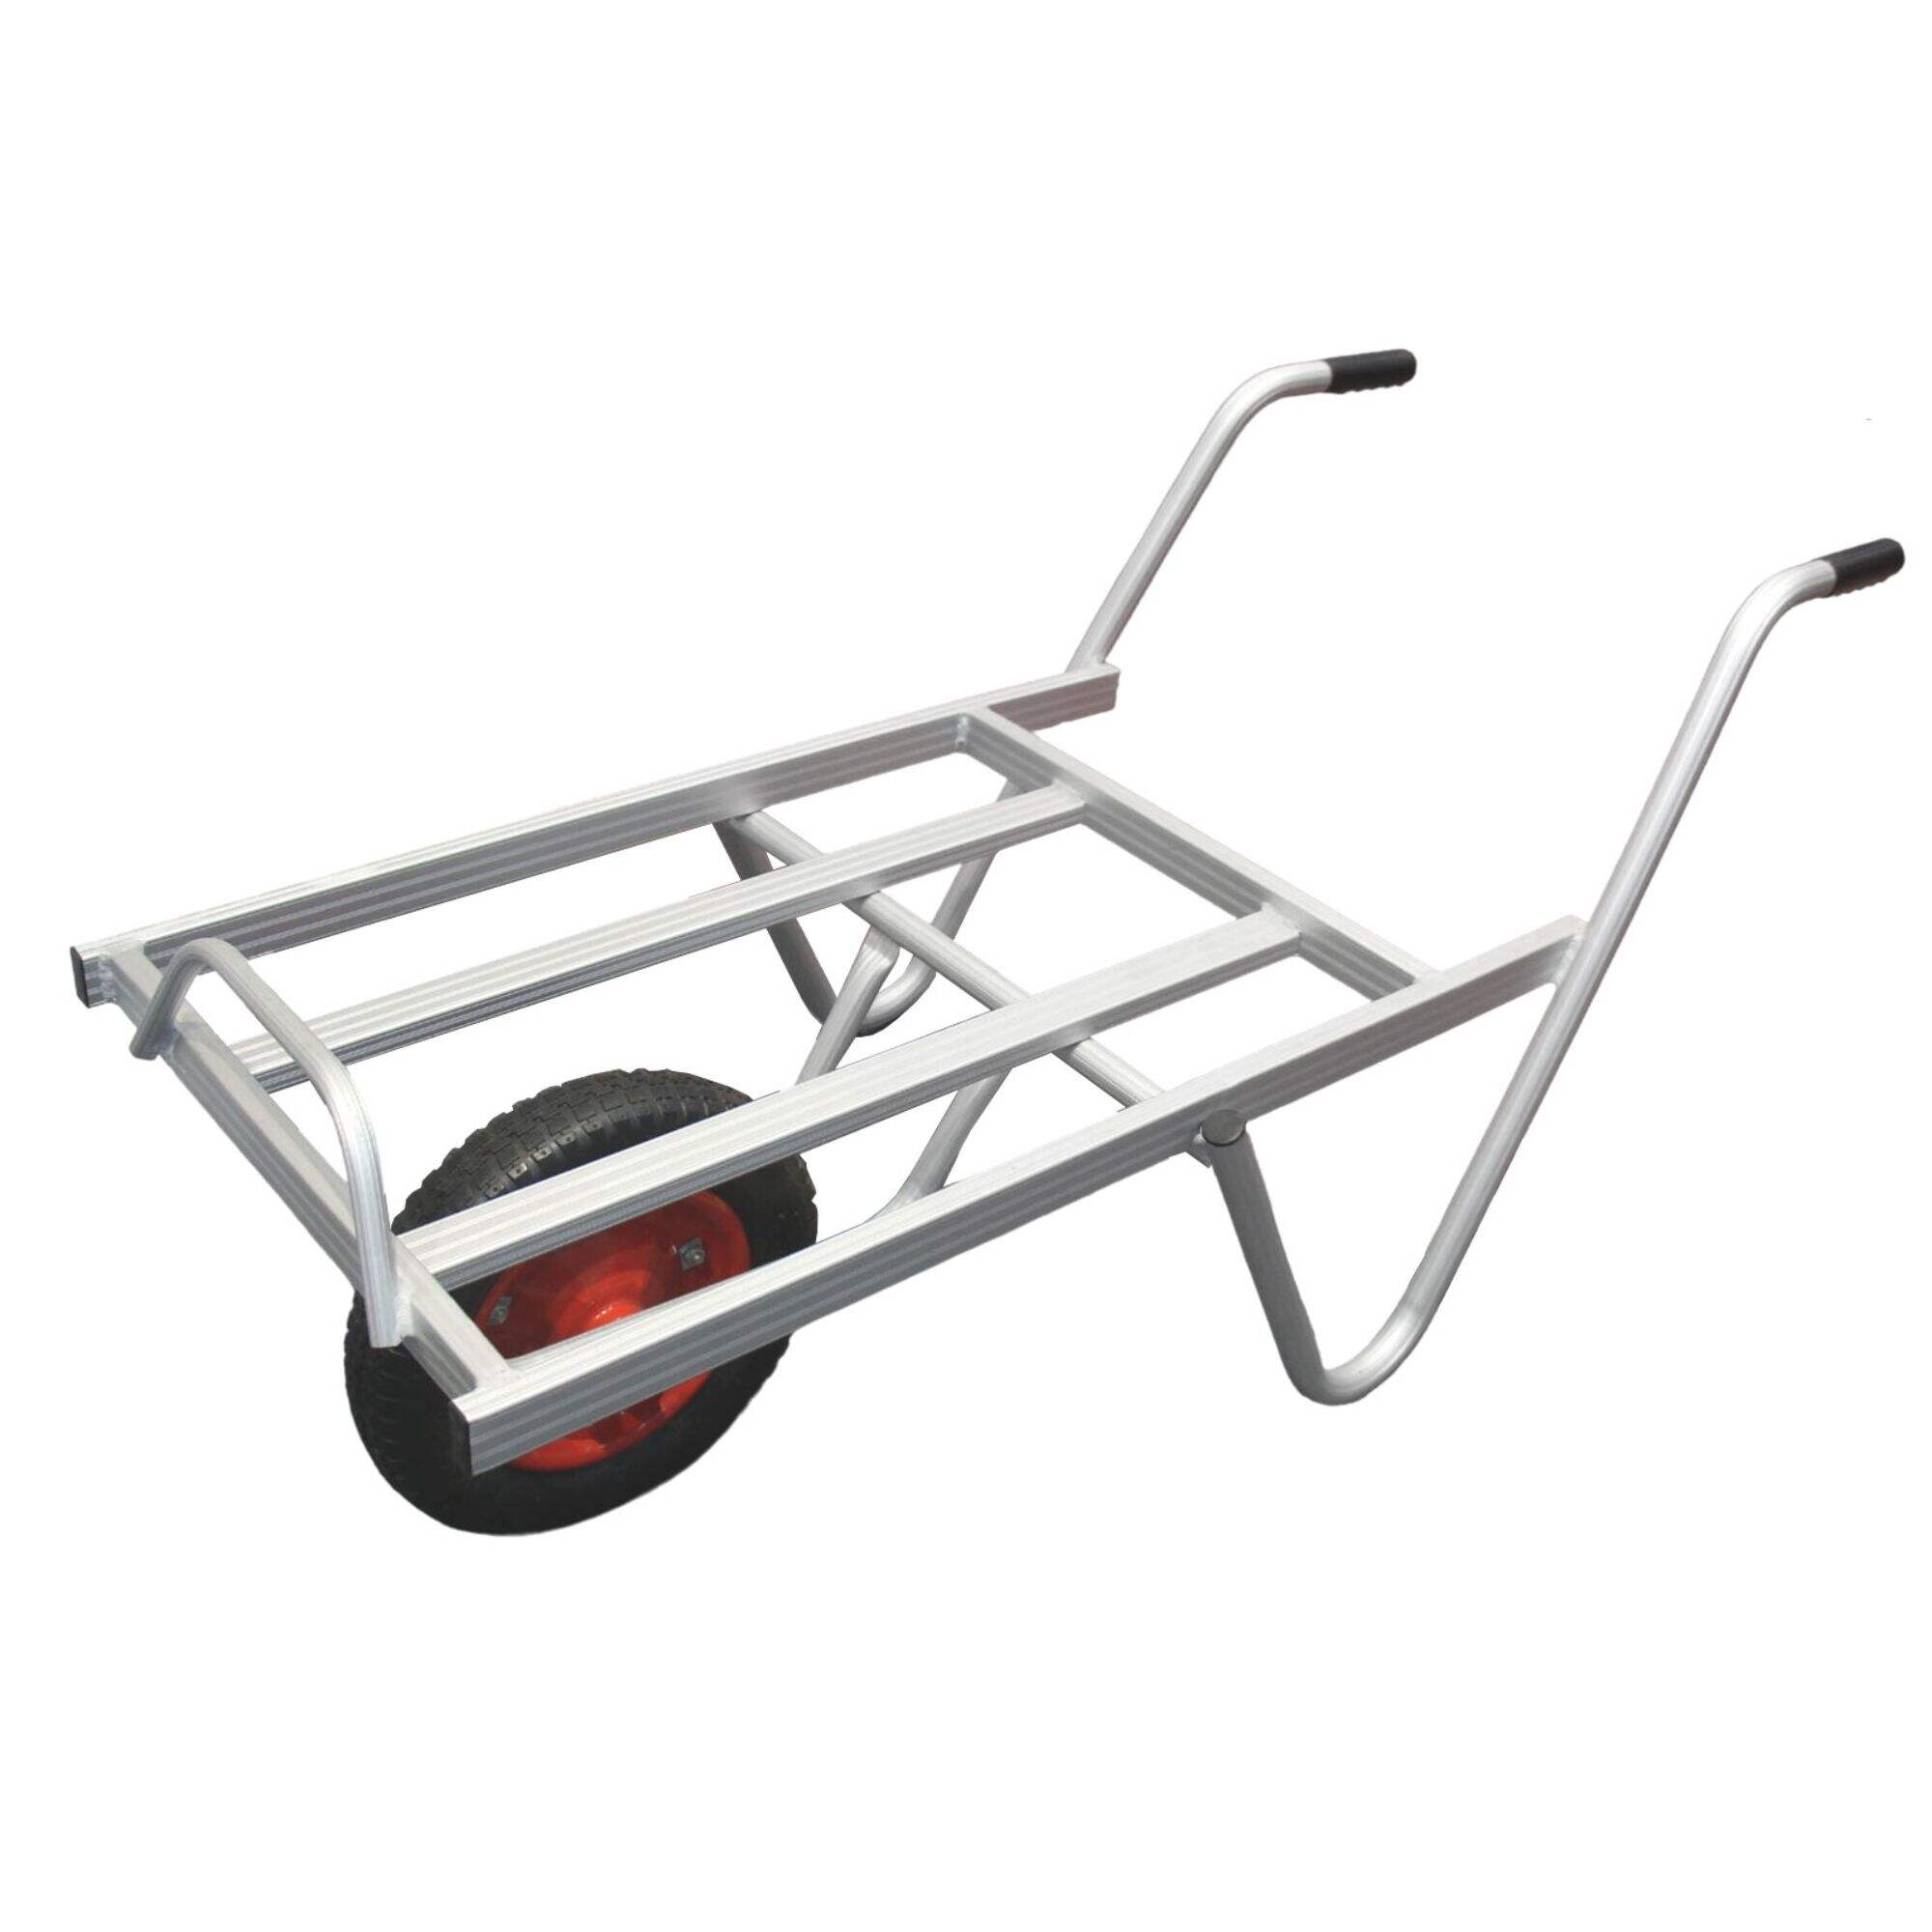 TC2403 Platform Aluminum Trolley, Hand Trolley Cart with 13x3 inch Pneumatic Tyre for Home Farming Garden